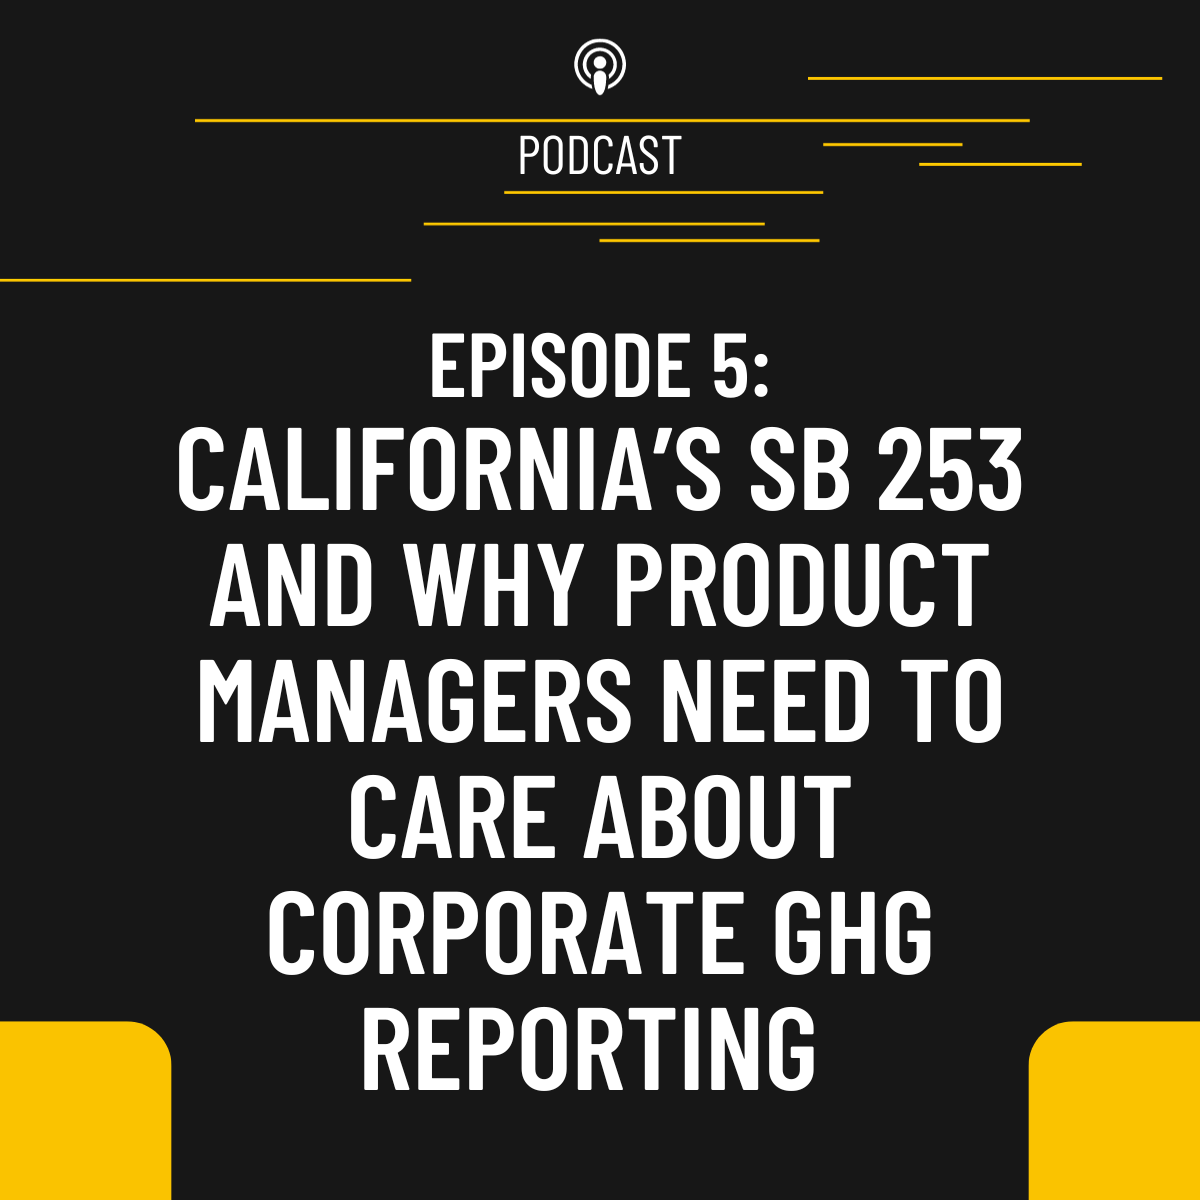 Episode 5: California’s SB 253 and why product managers need to care about corporate GHG reporting